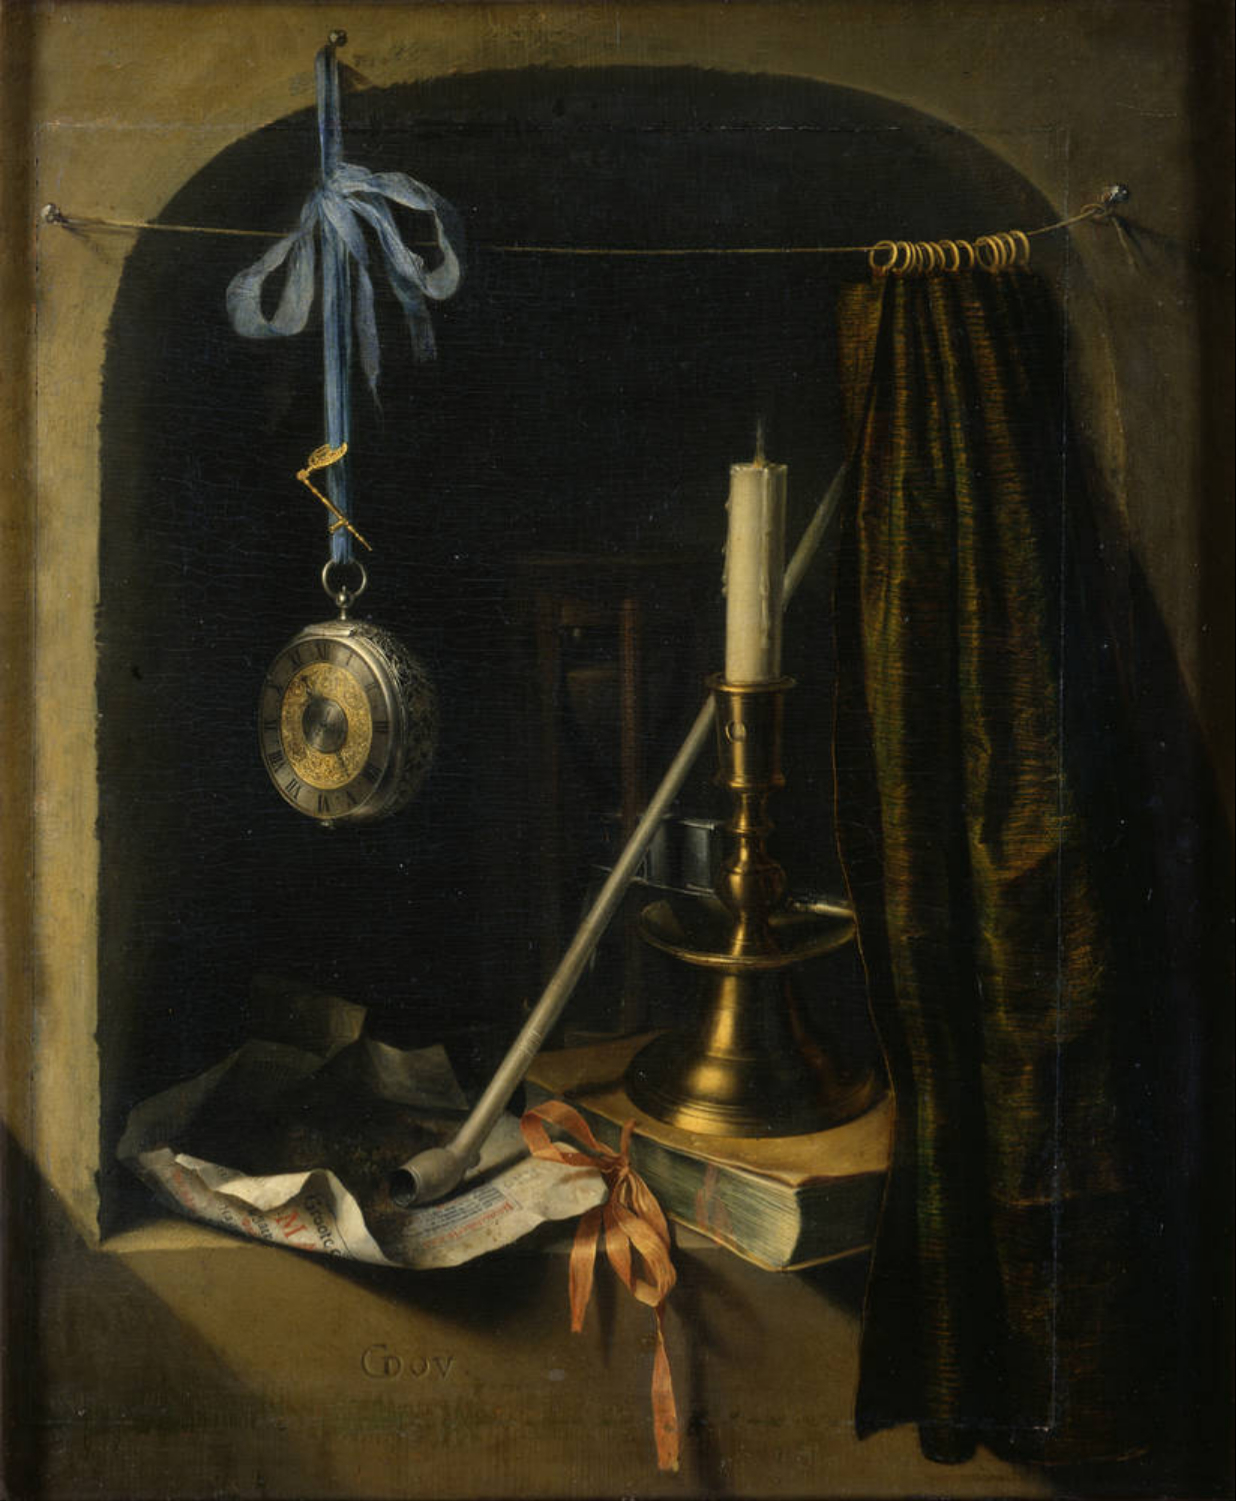 Gerrit Dou
"Still life with candle and watch", 1660
Oil on canvas, 17x14 inches /  43x36 cm